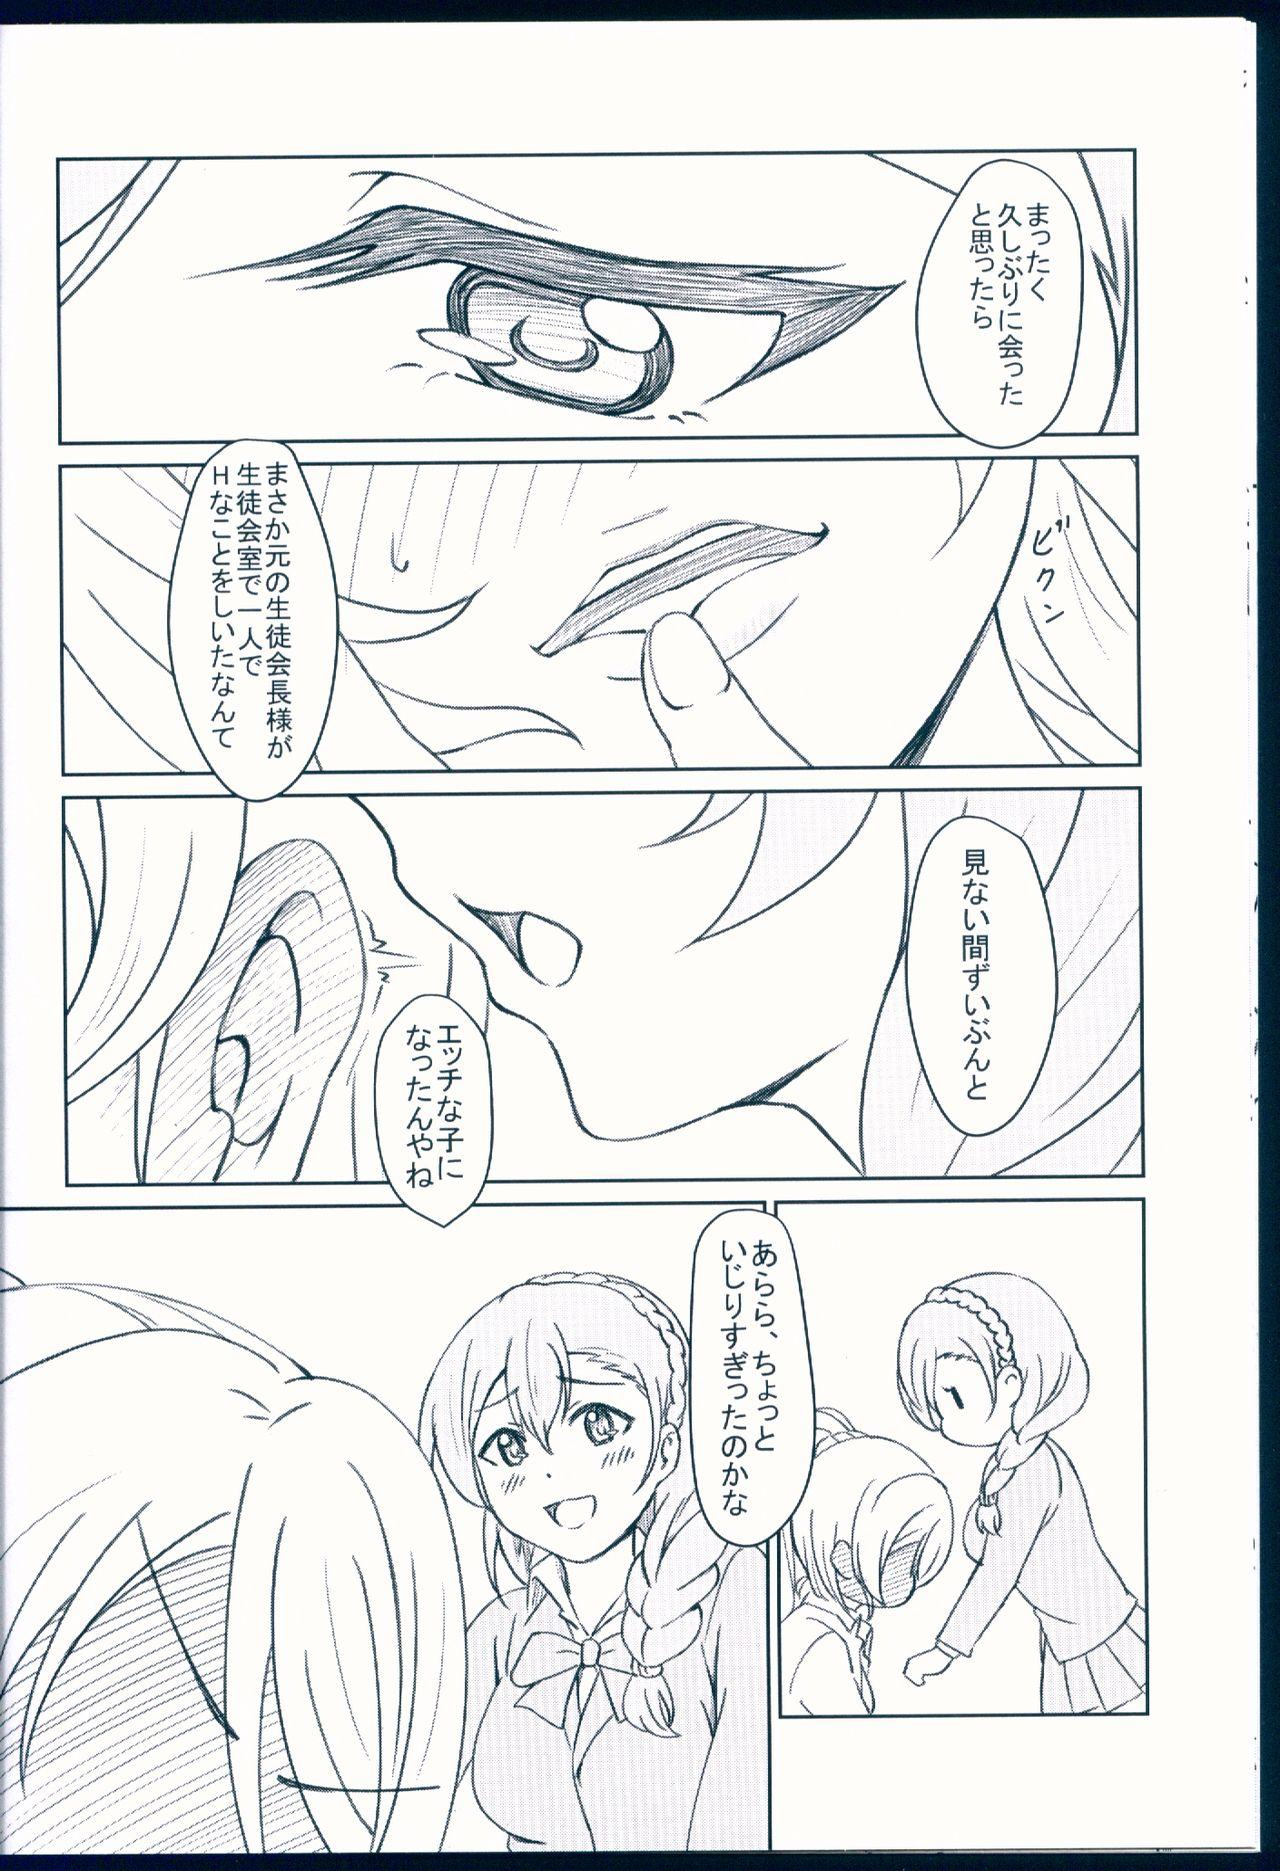 Officesex NOZOERI REUNION - Love live Art - Page 12